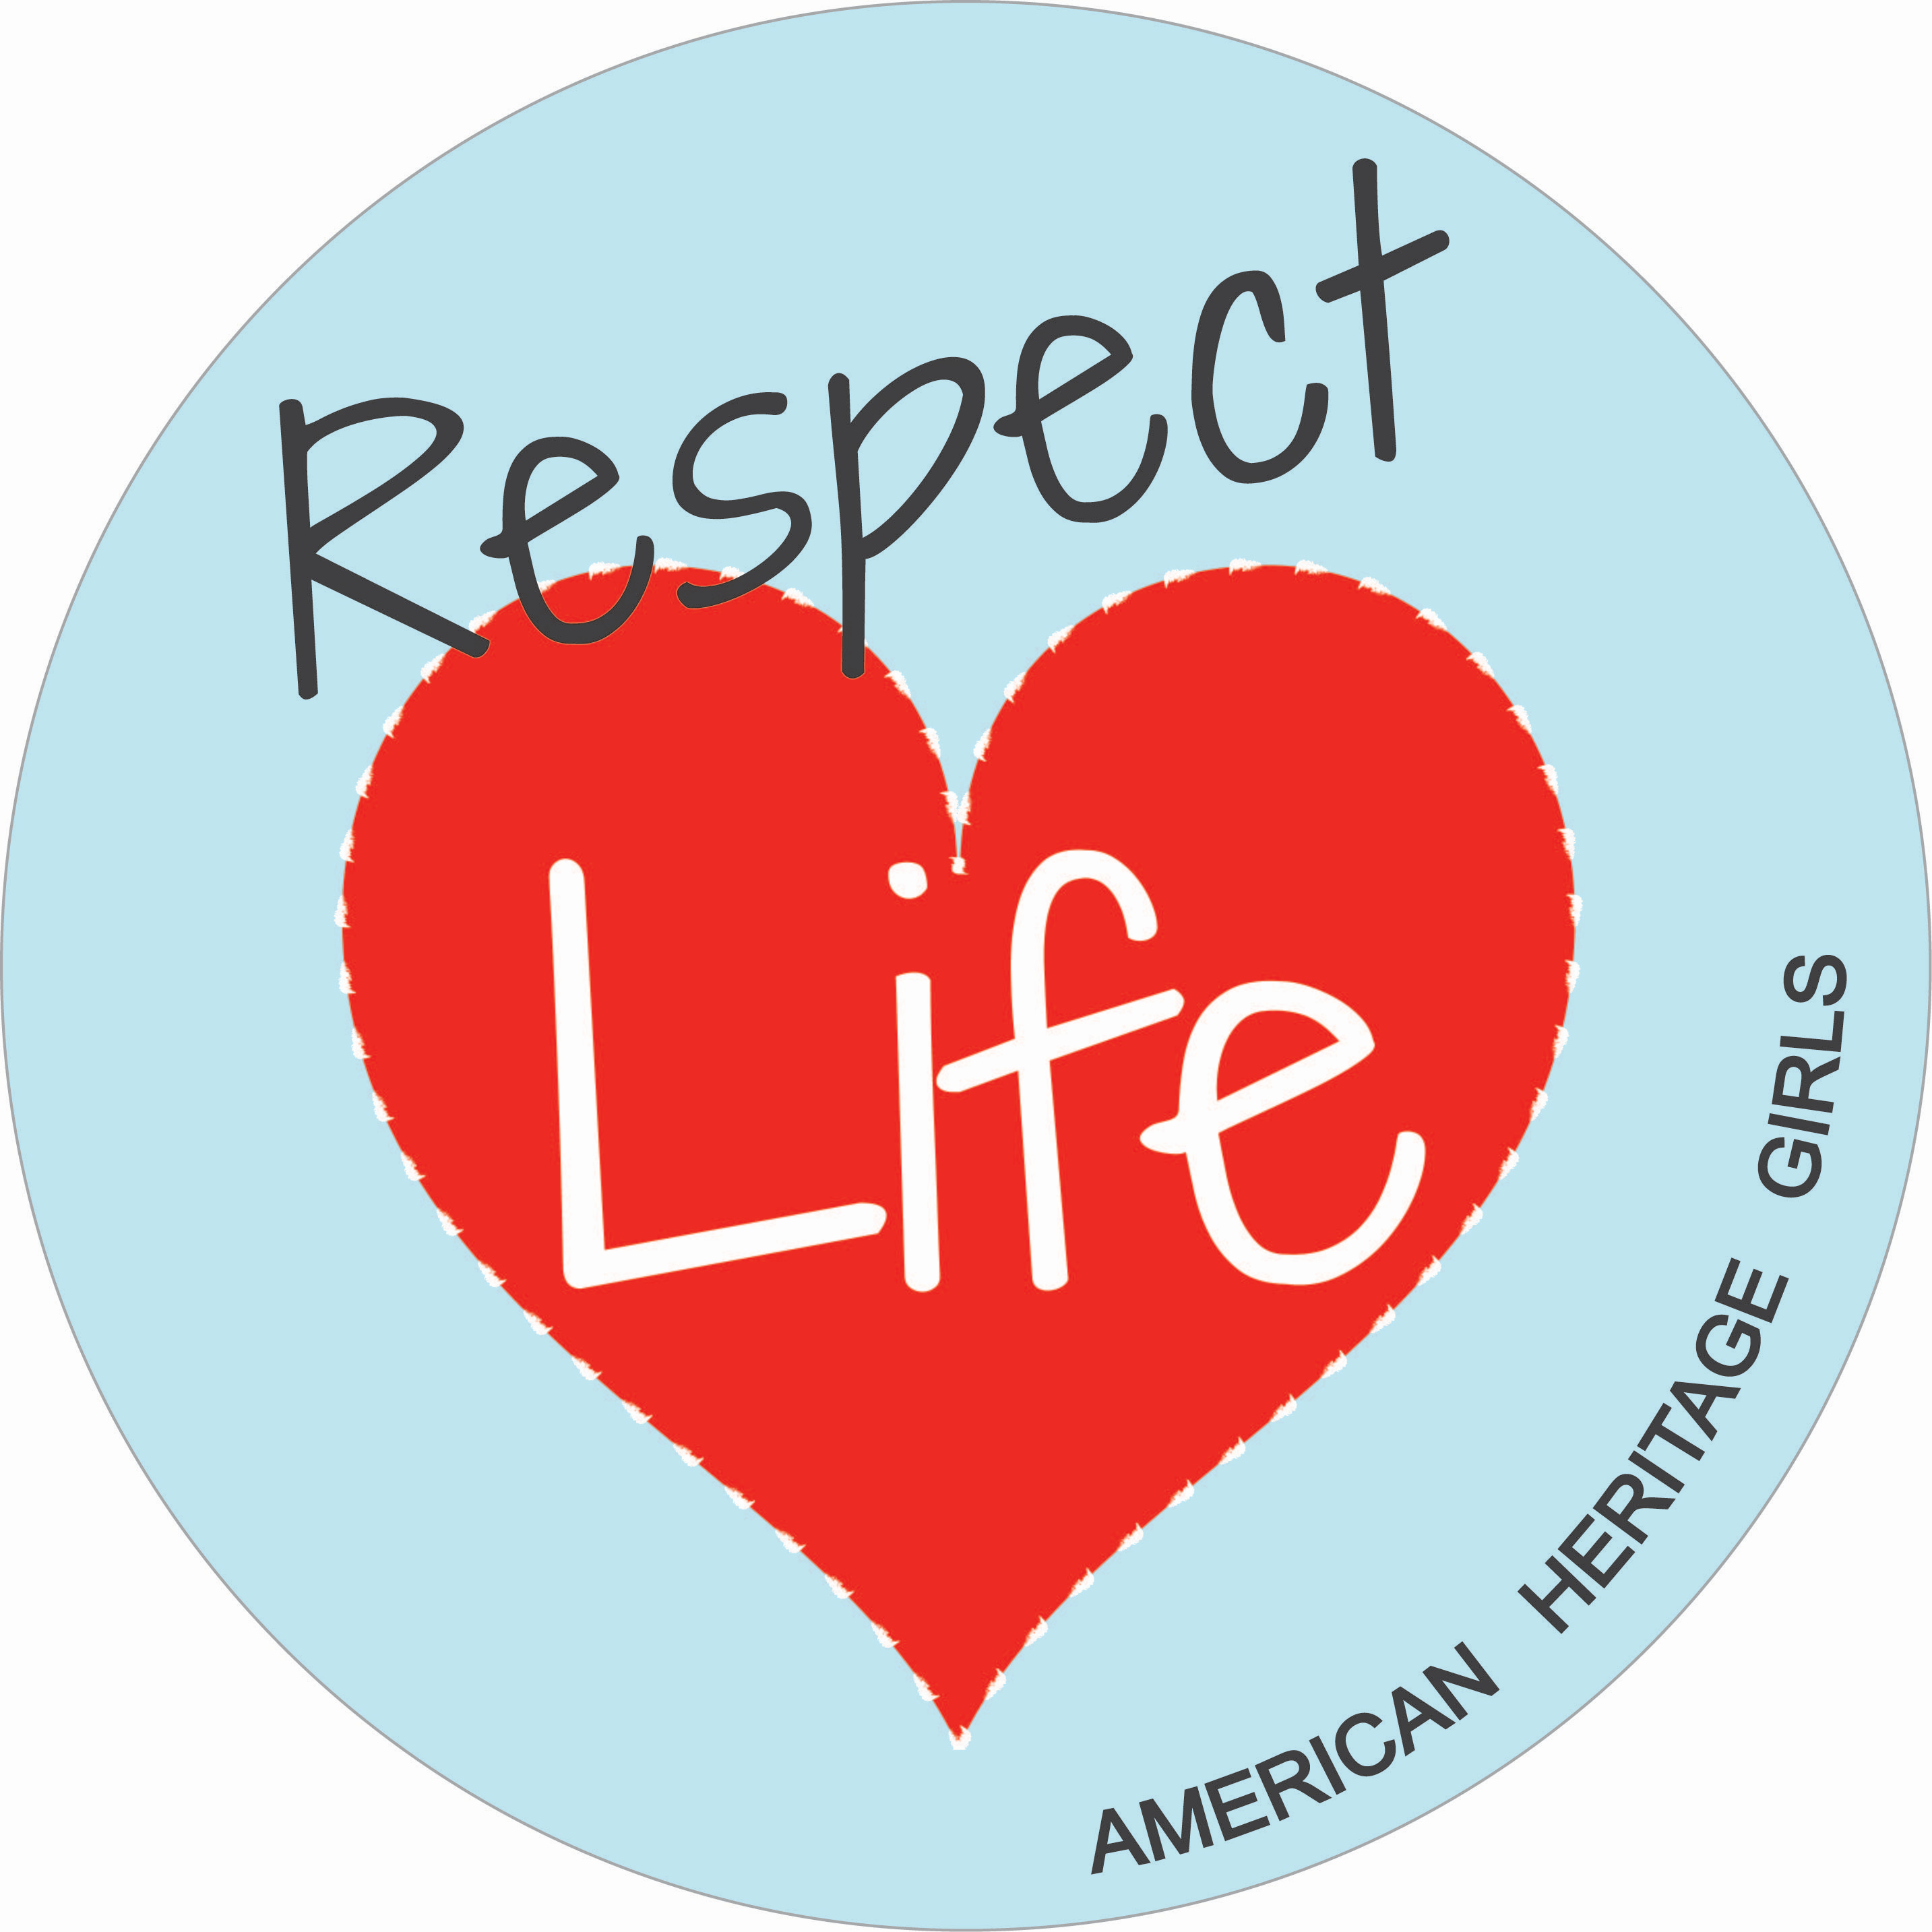 American Heritage Girls Announces New Respect Life Patch